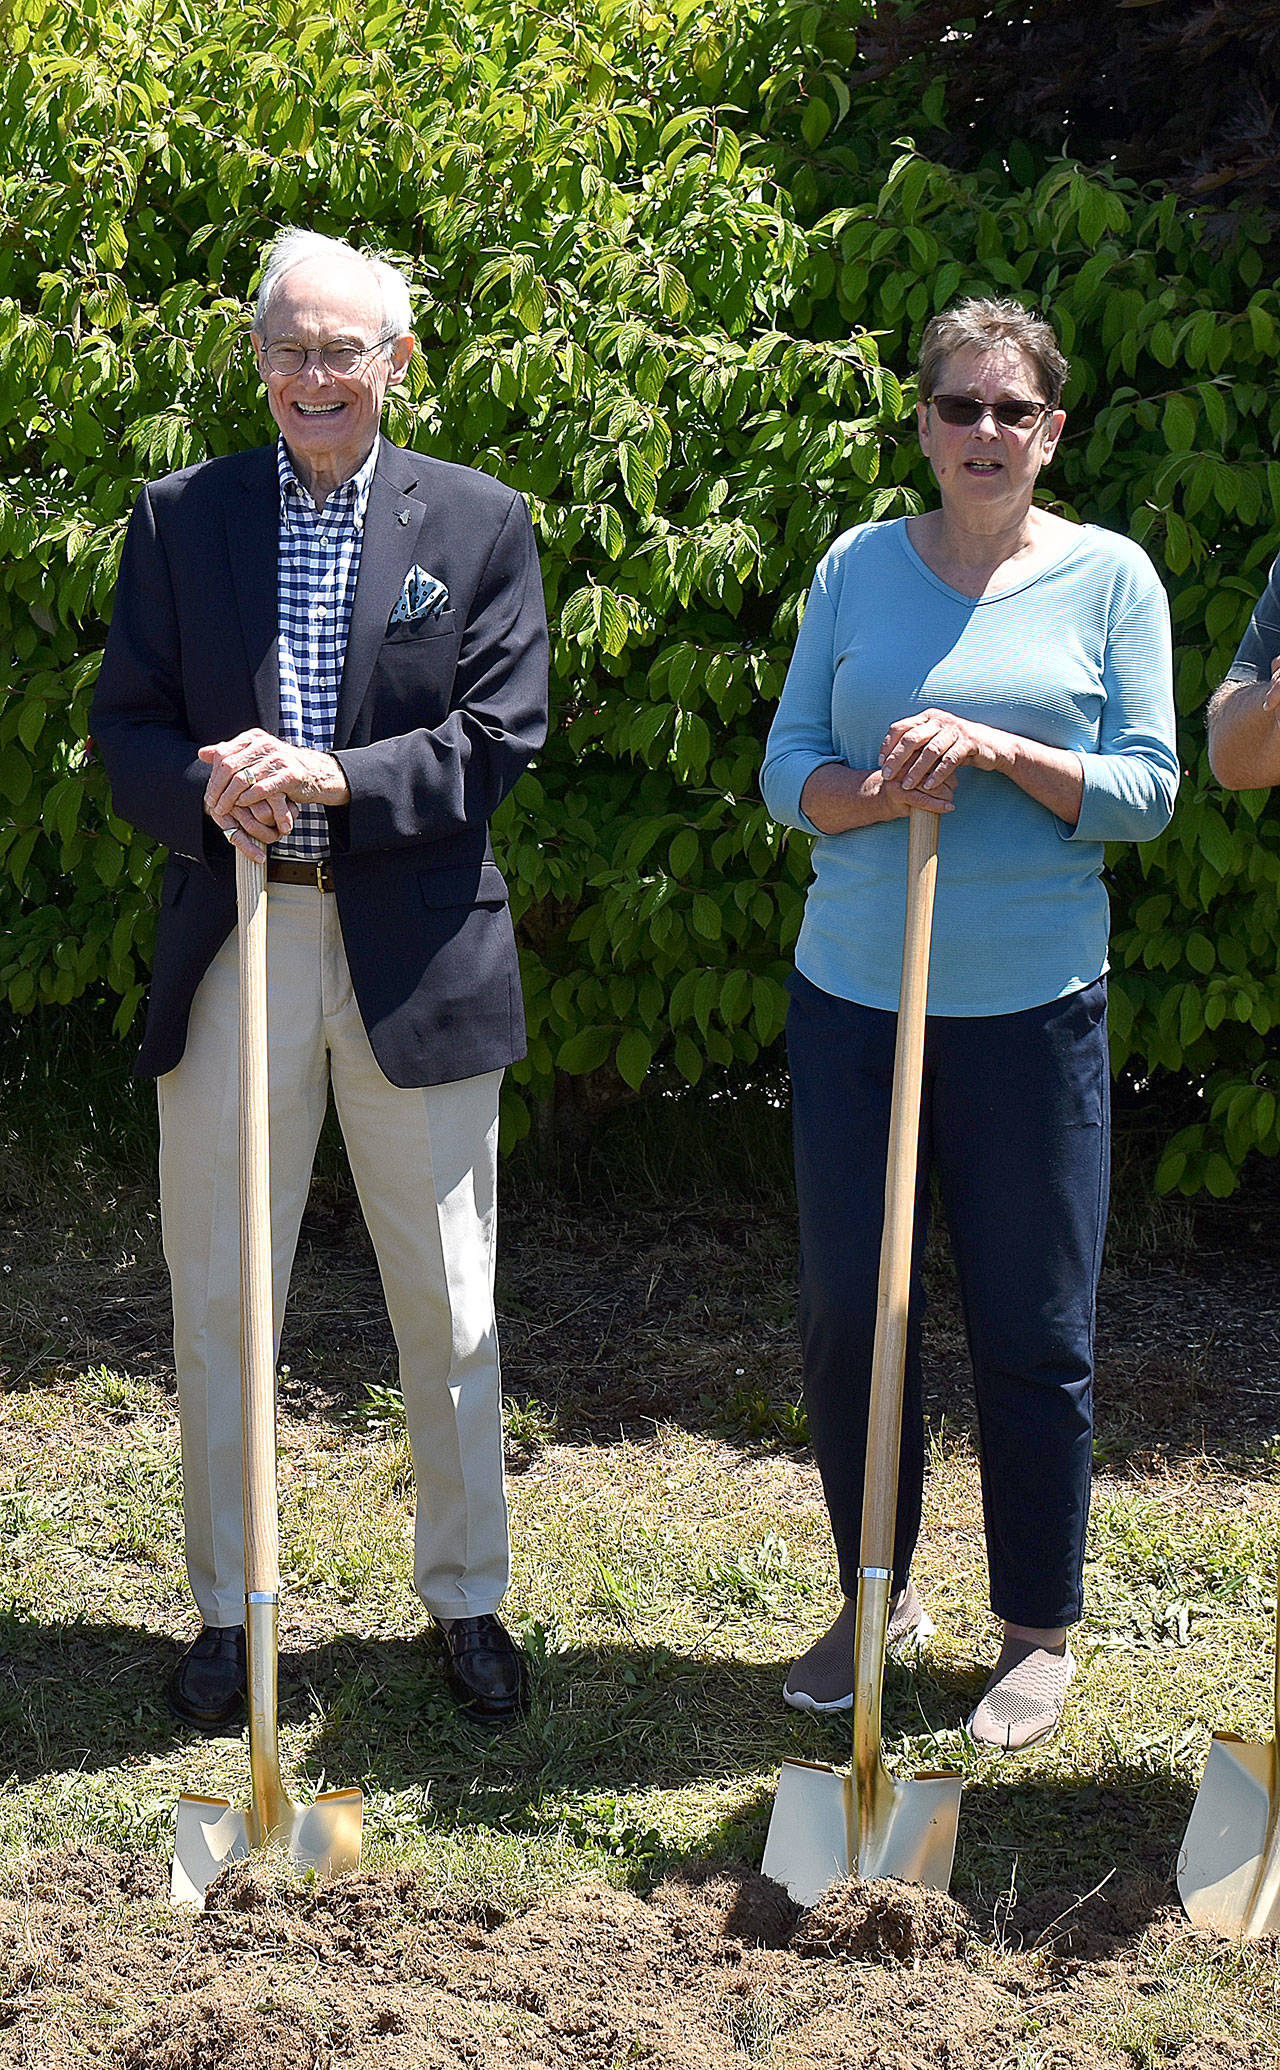 DAN HAMMOCK | THE DAILY WORLD 
Willapa Community Development Association co-founders David Gauger and Rebecca Chaffee break ground at the site of the Willapa Center in Raymond Thursday.